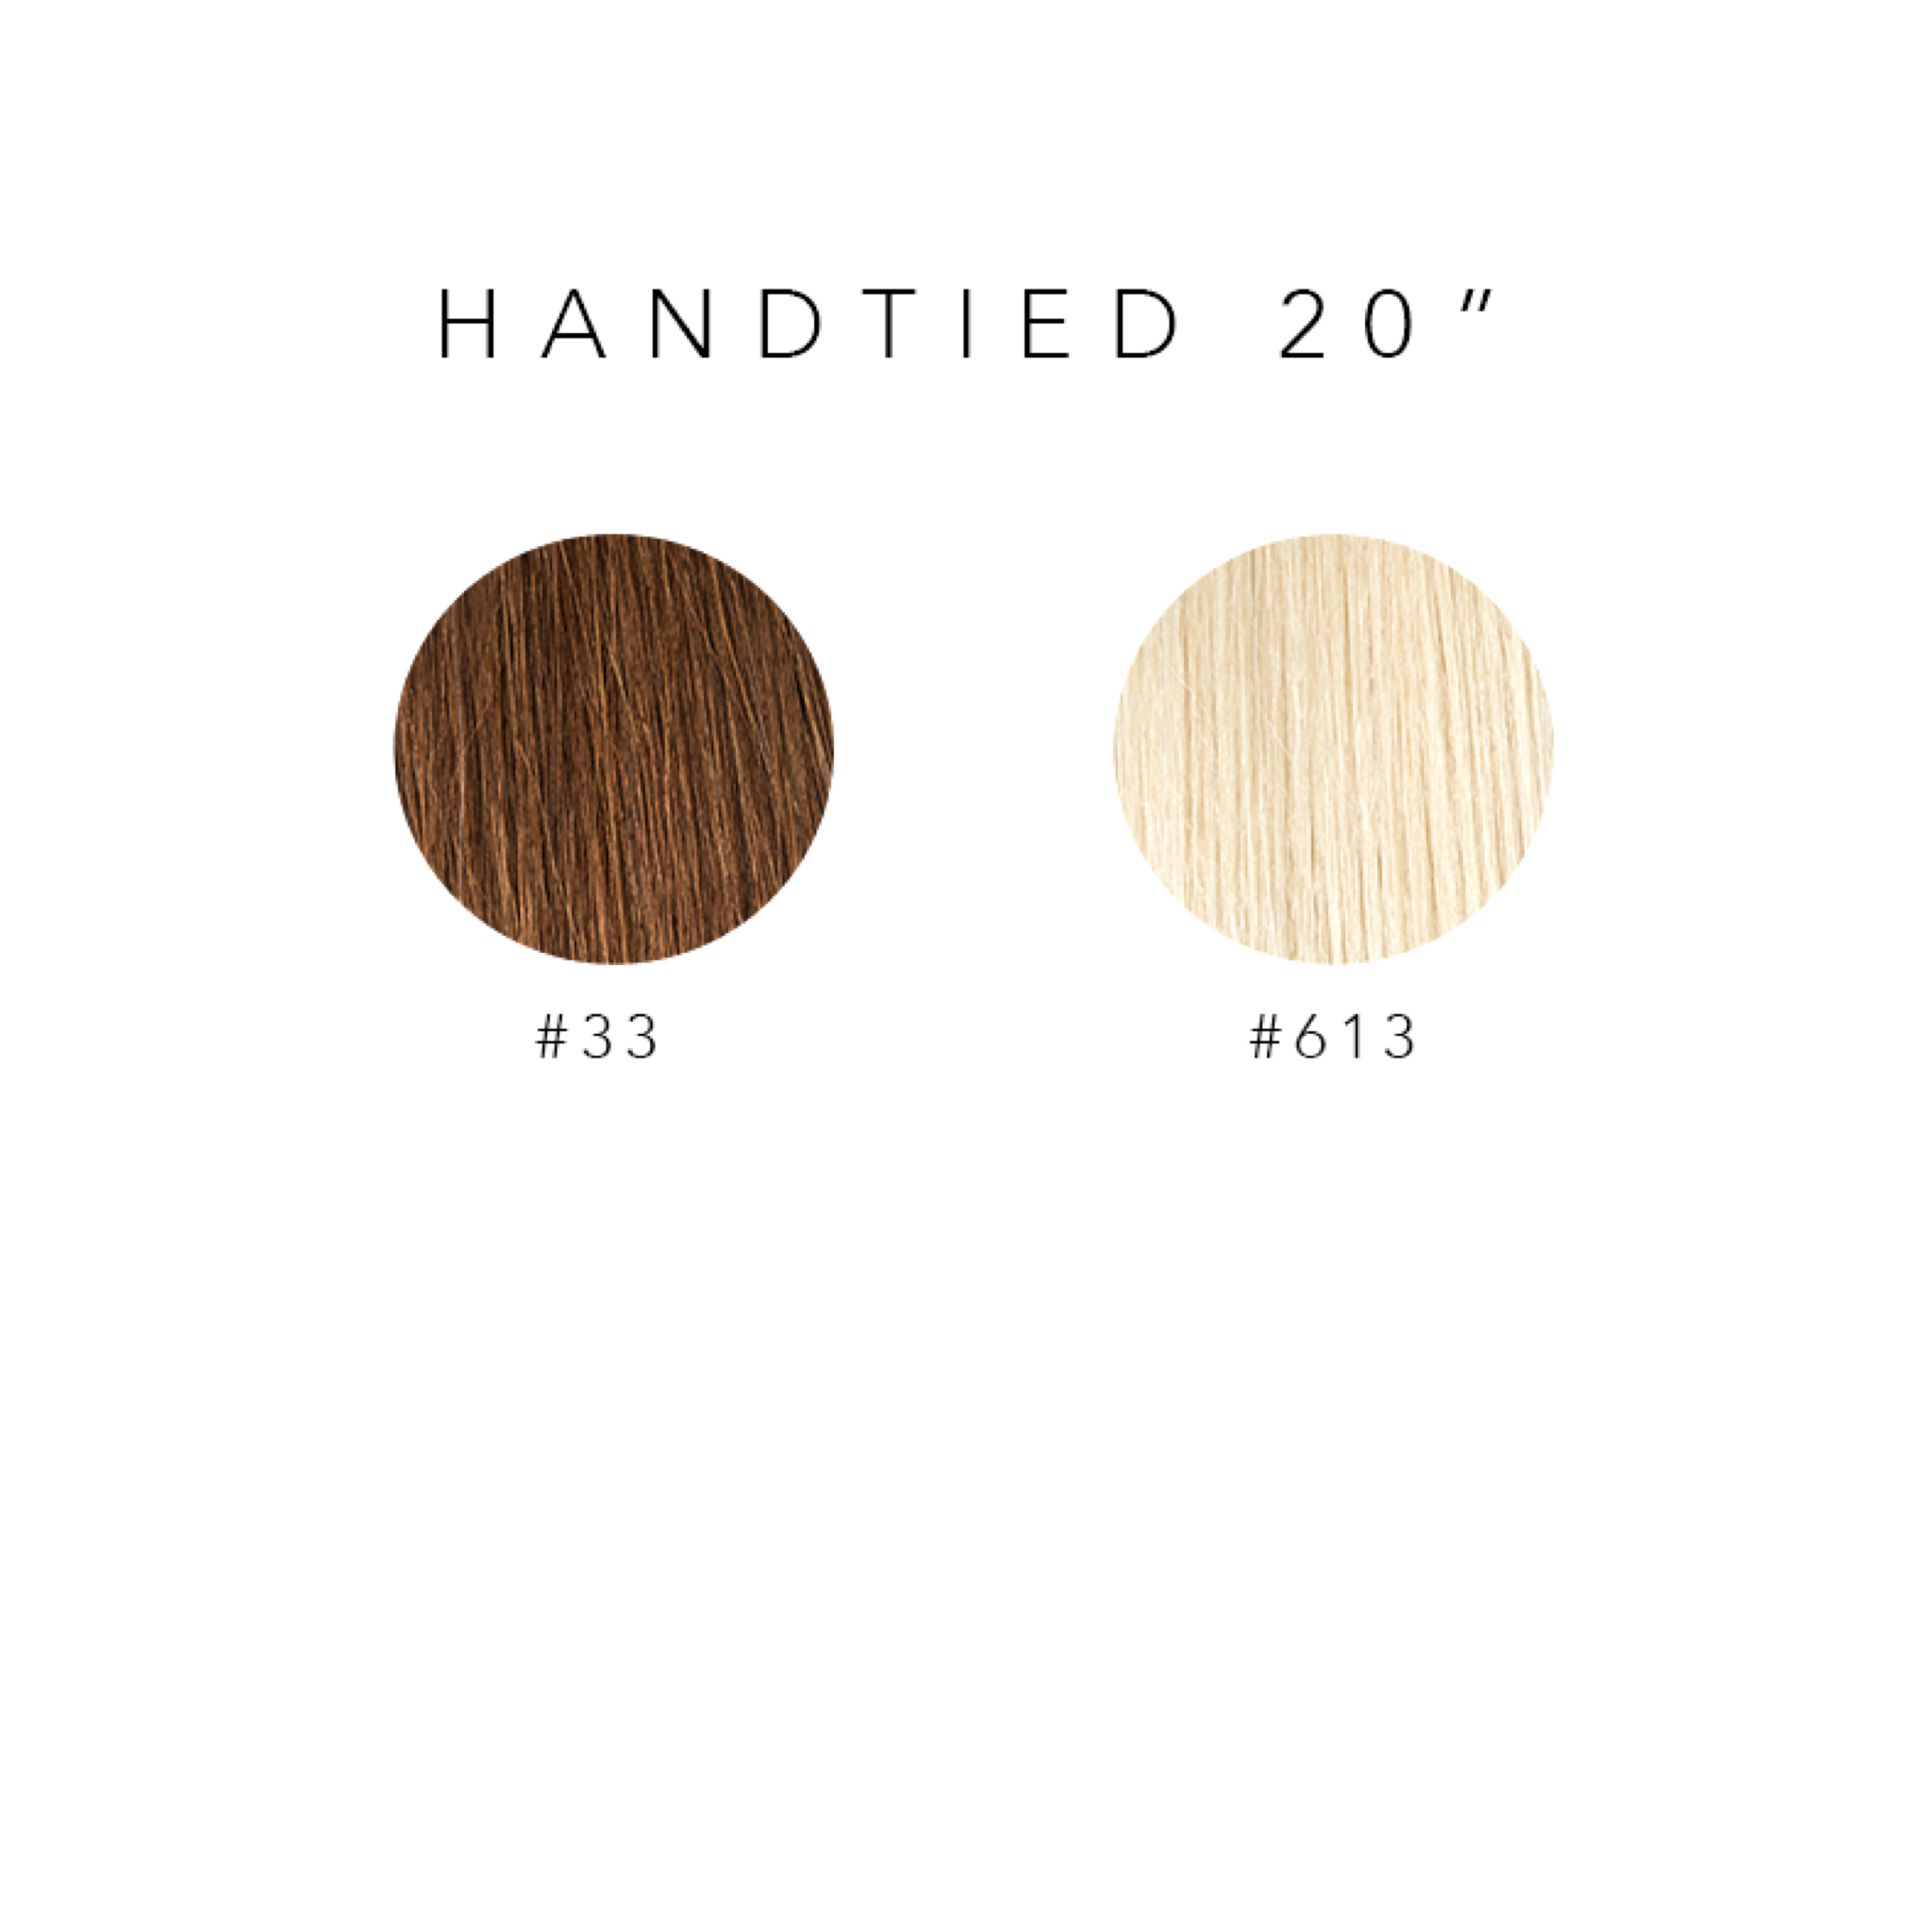 Back In Stock: Hand Tied Wefts!